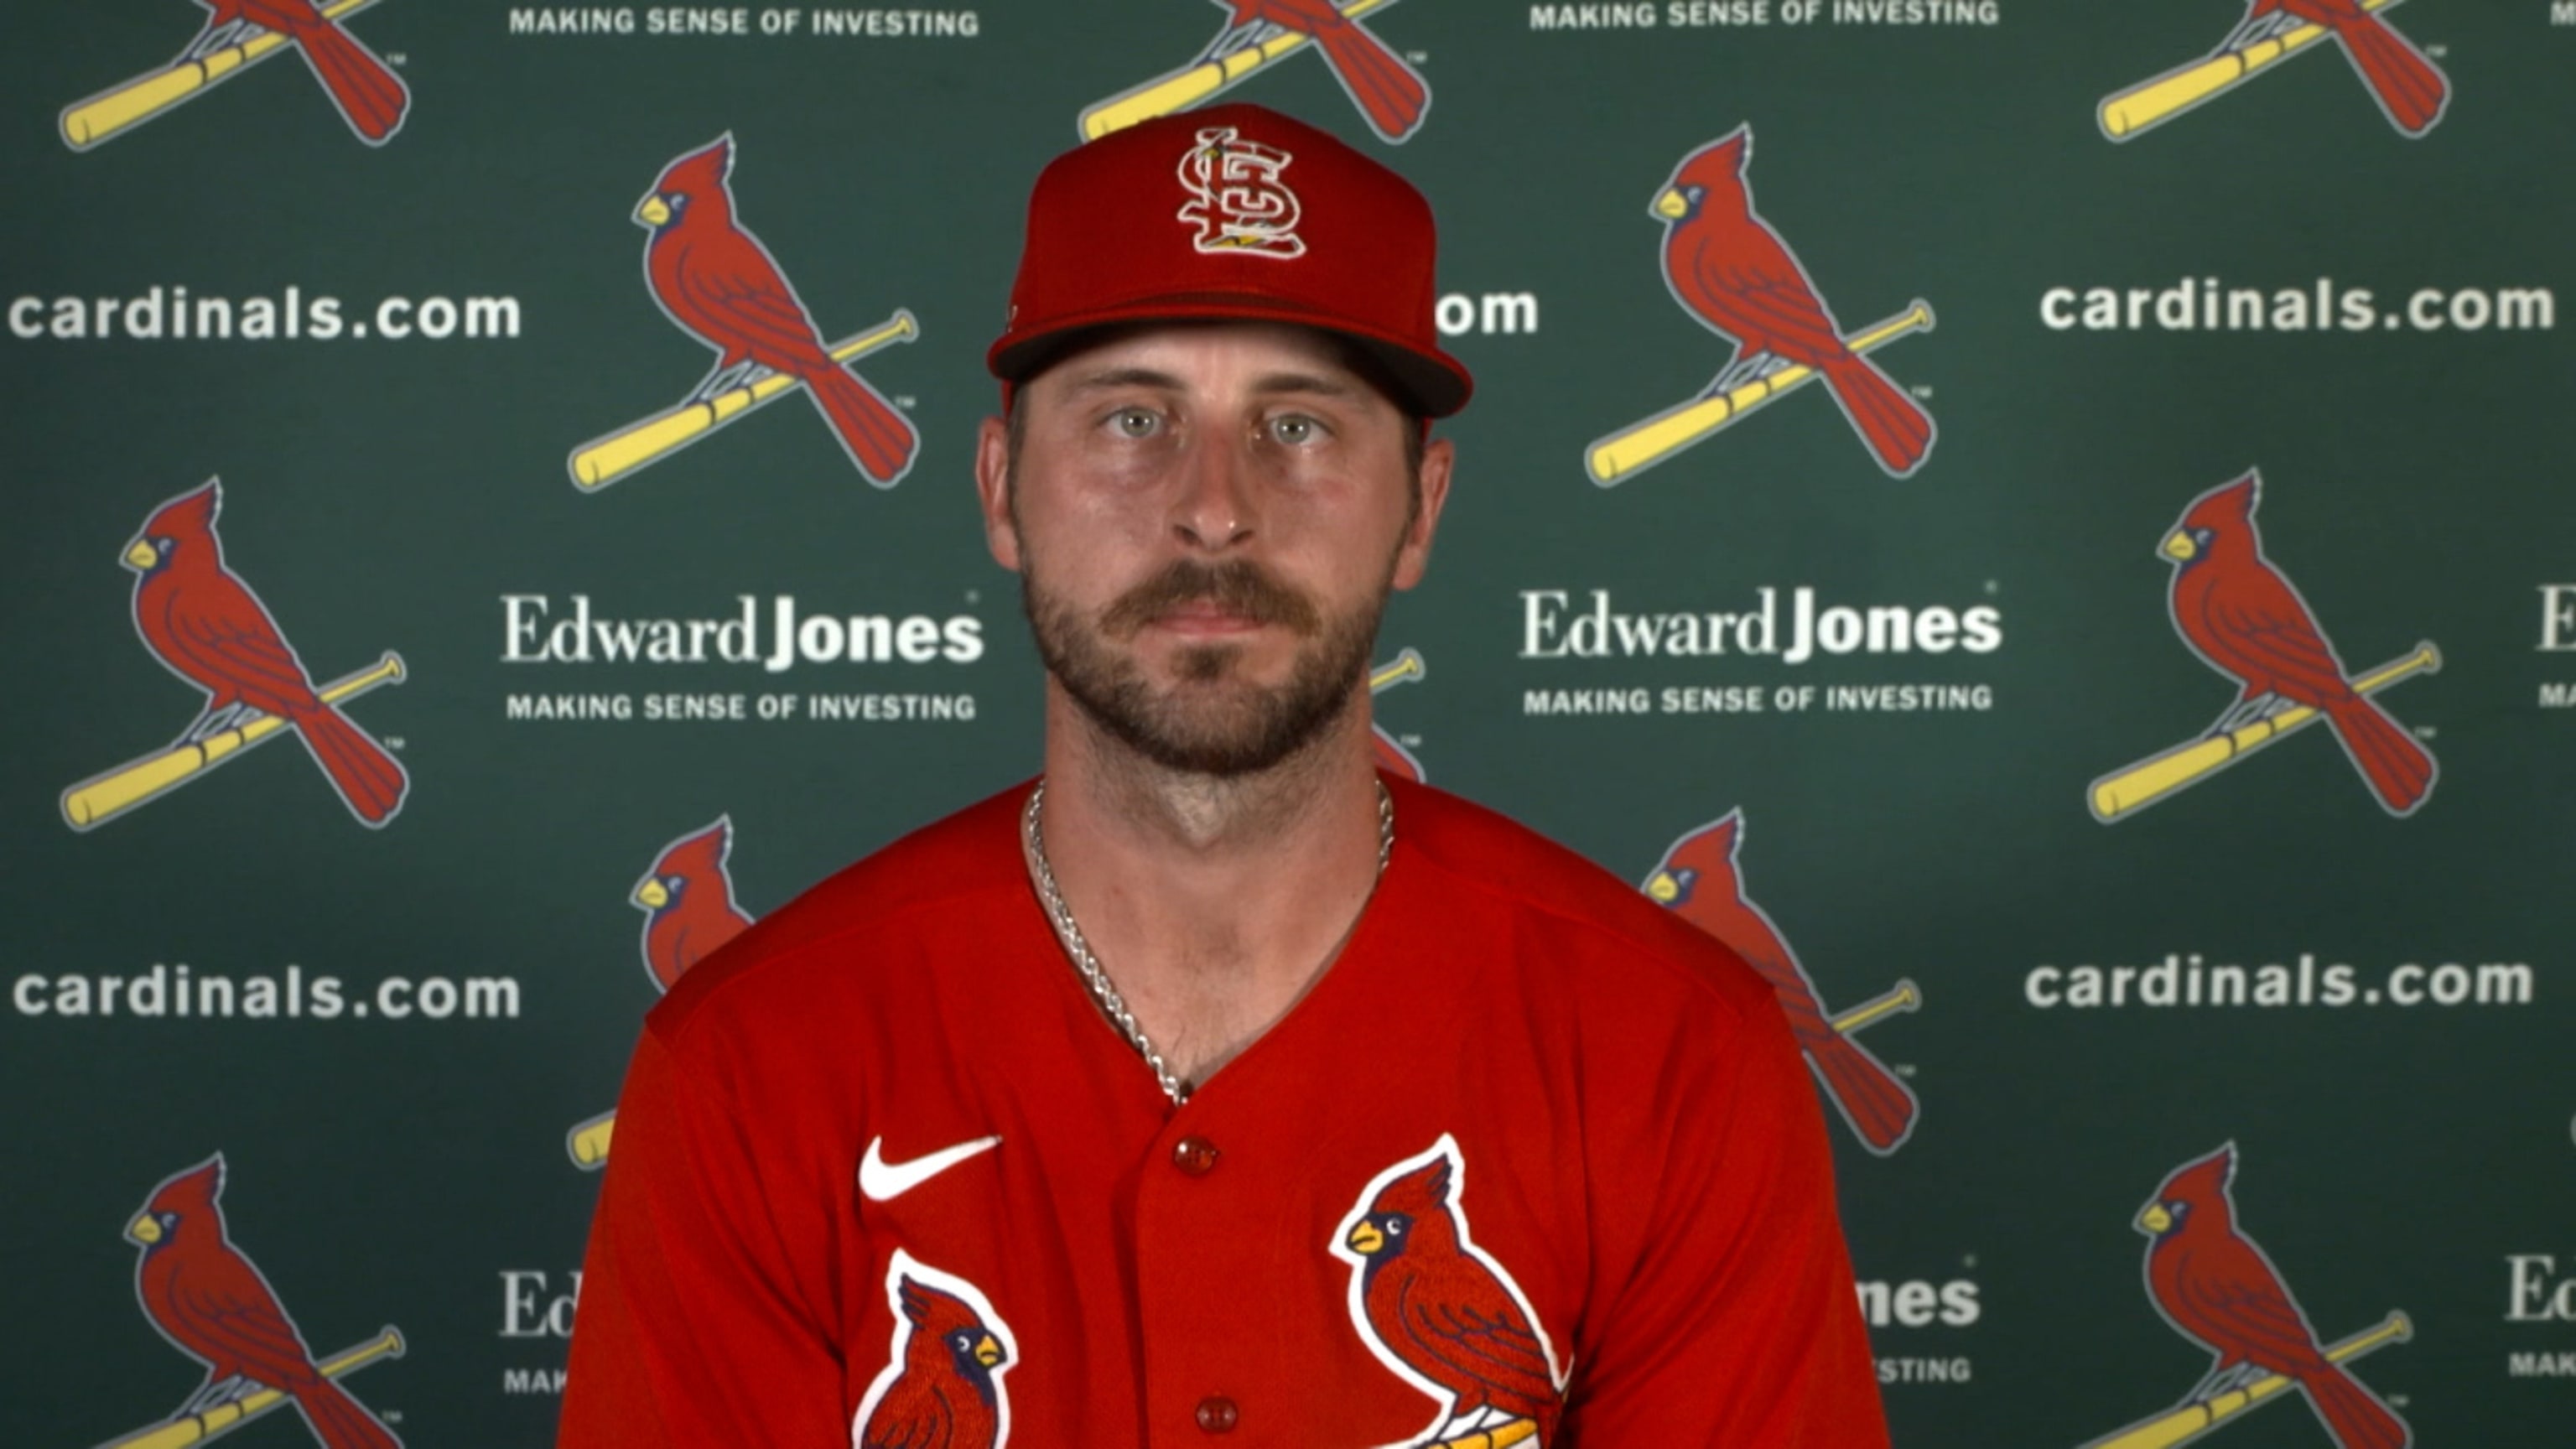 SF Giants: Can Paul DeJong provide 'stability' needed at shorstop?